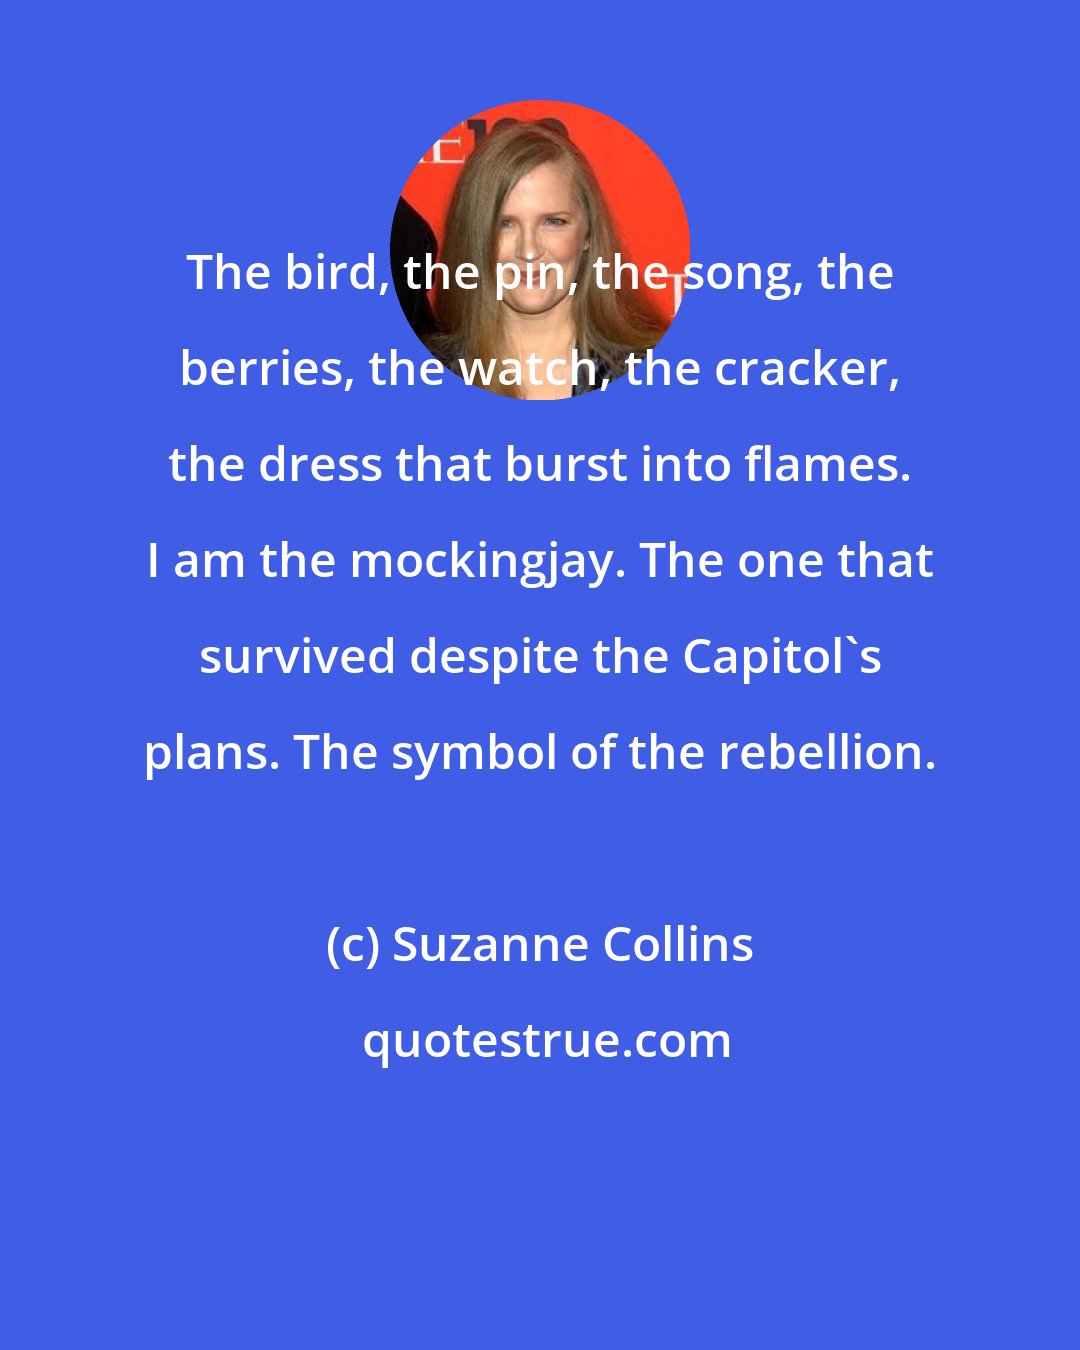 Suzanne Collins: The bird, the pin, the song, the berries, the watch, the cracker, the dress that burst into flames. I am the mockingjay. The one that survived despite the Capitol's plans. The symbol of the rebellion.